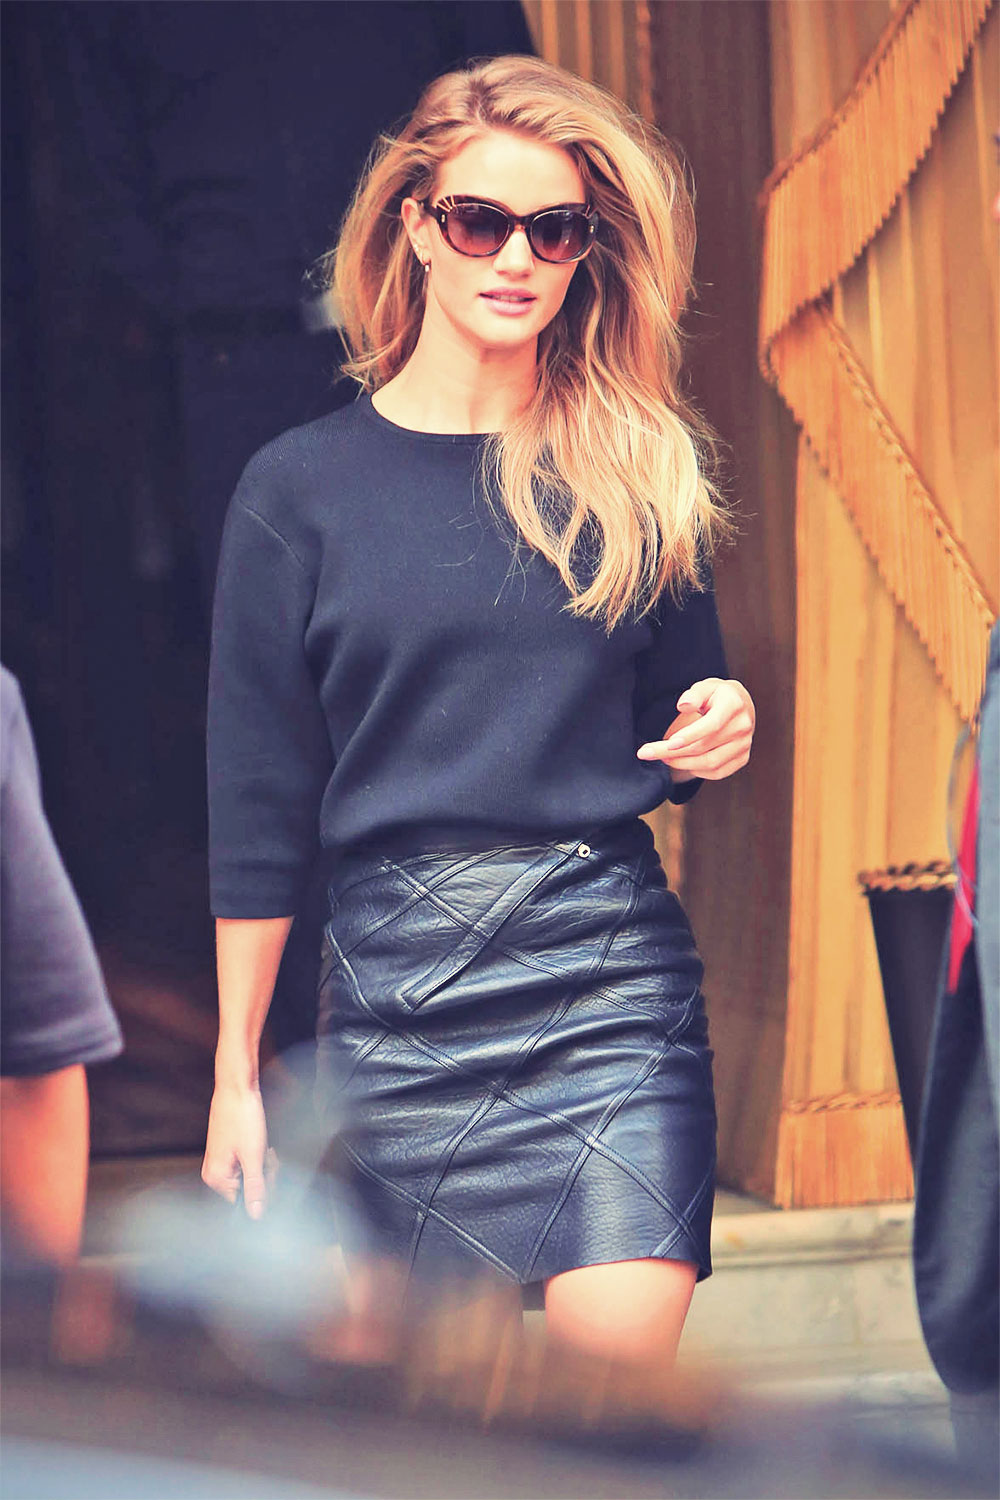 Rosie Huntington-Whiteley out and about during Paris Fashion Week